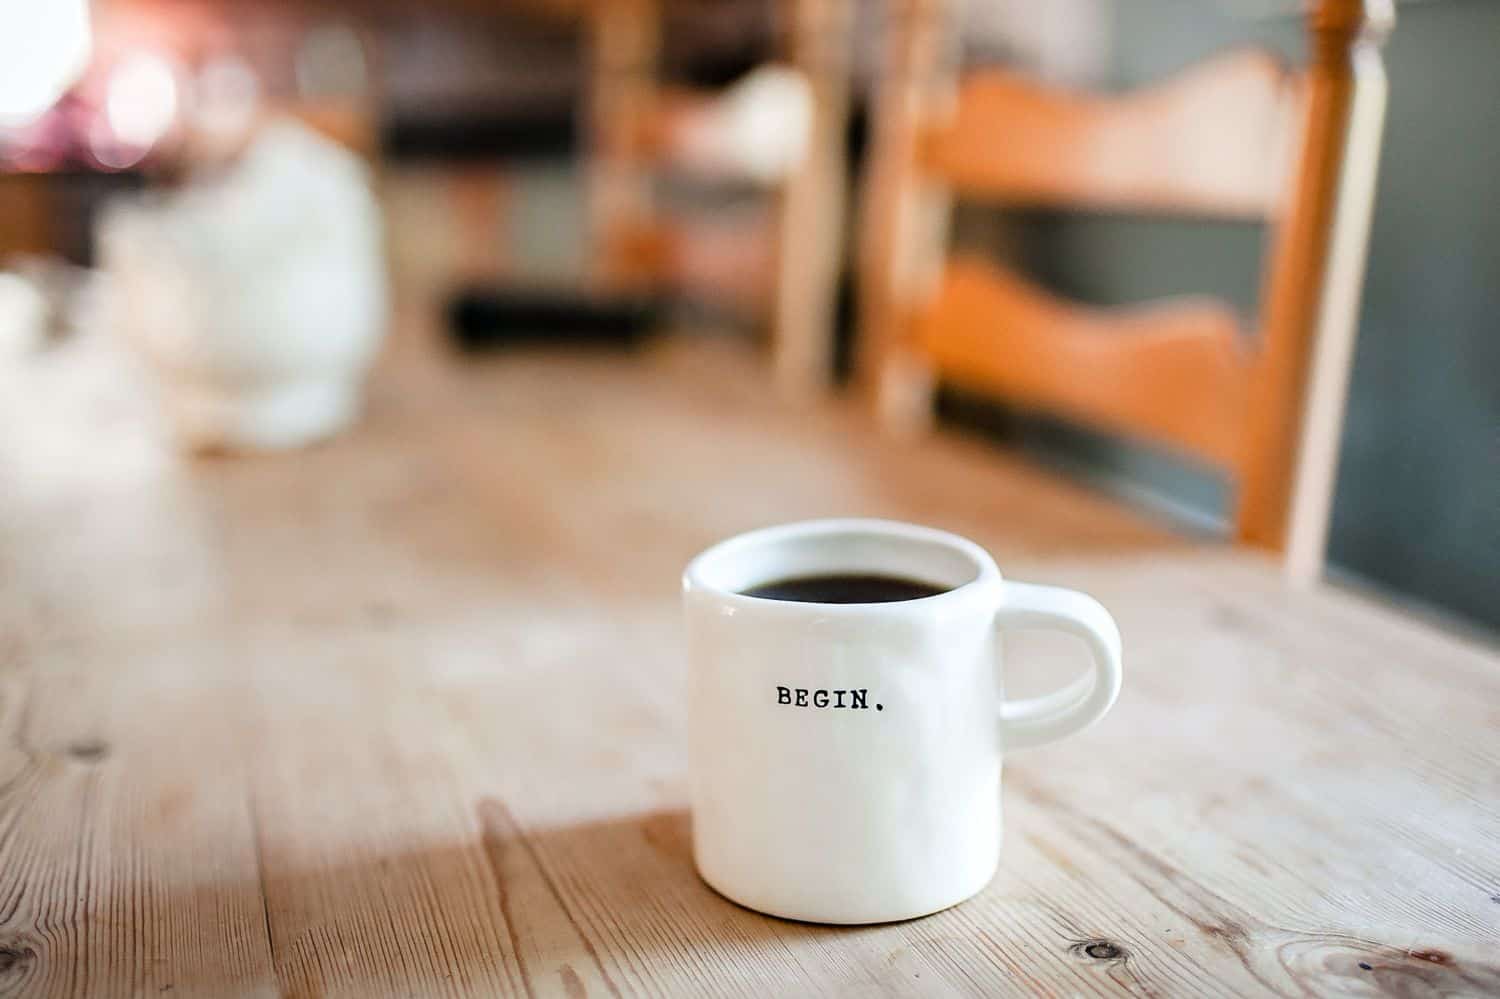 A white mug of coffee with the word "Begin" engraved on the side sits on a plain wooden table.